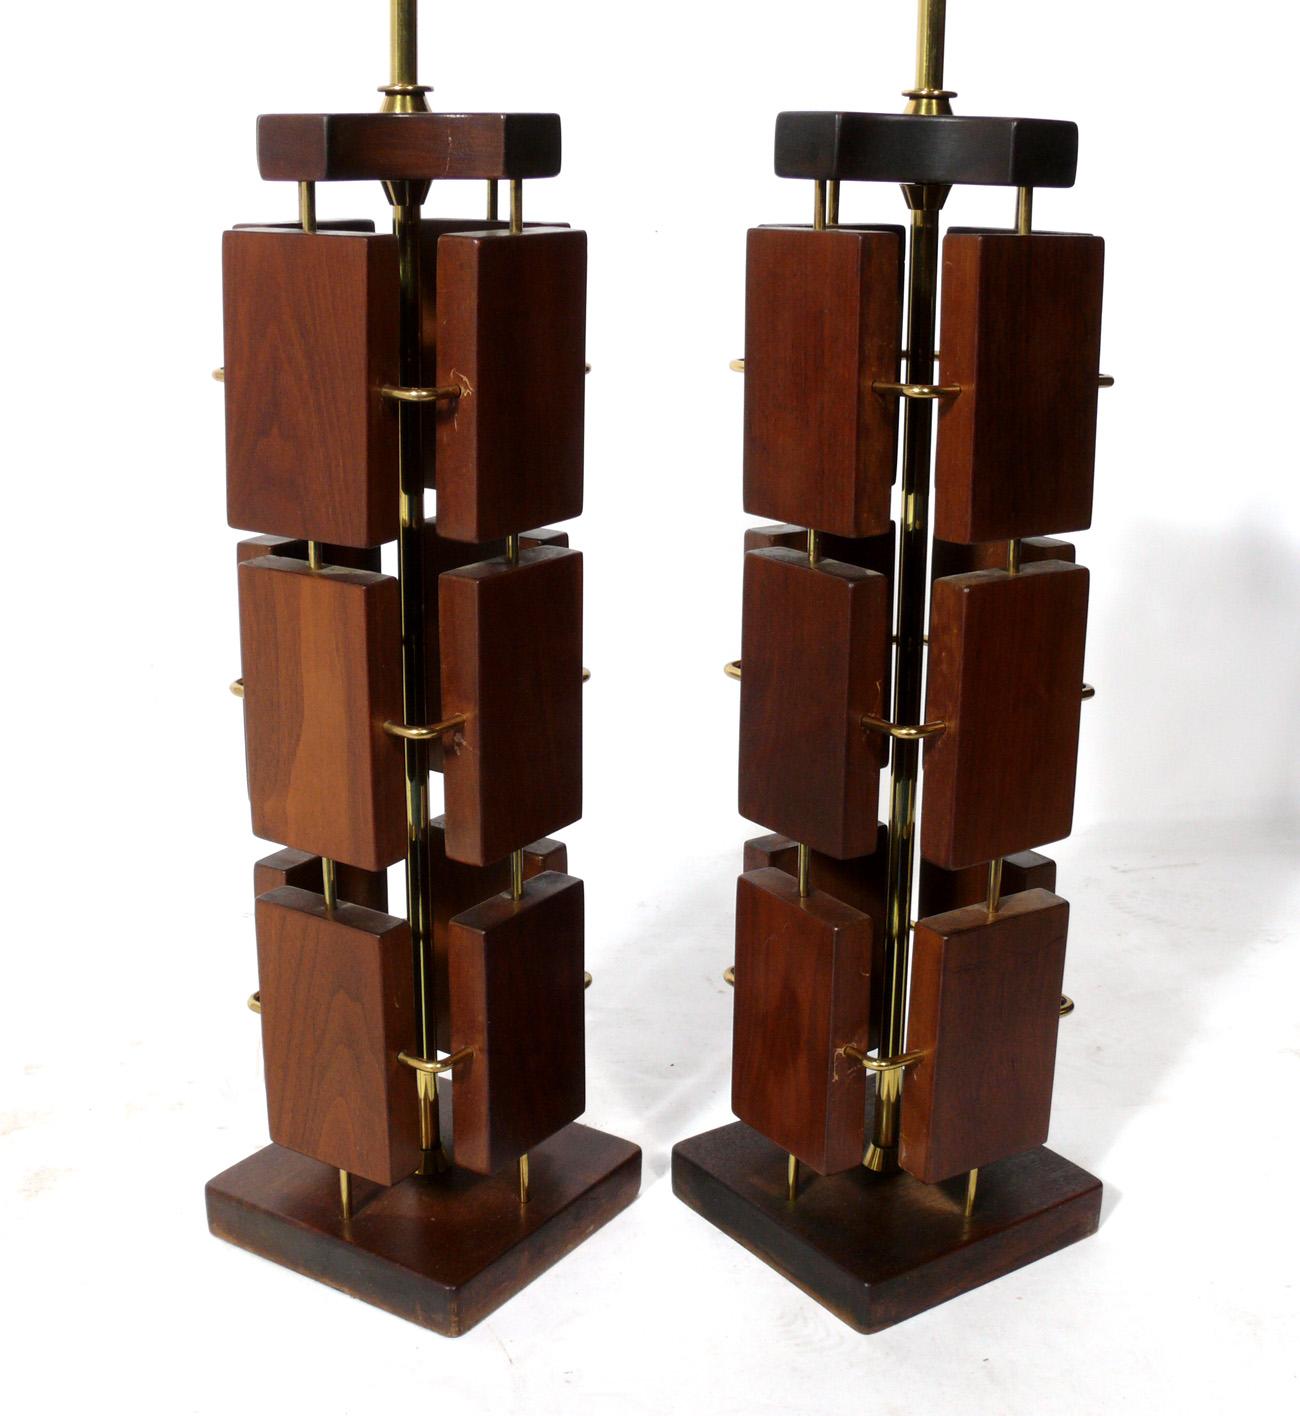 Pair of sculptural walnut and brass Mid-Century Modern lamps. American, circa 1960s. They have been rewired and are ready to use. The price noted below includes the shades.